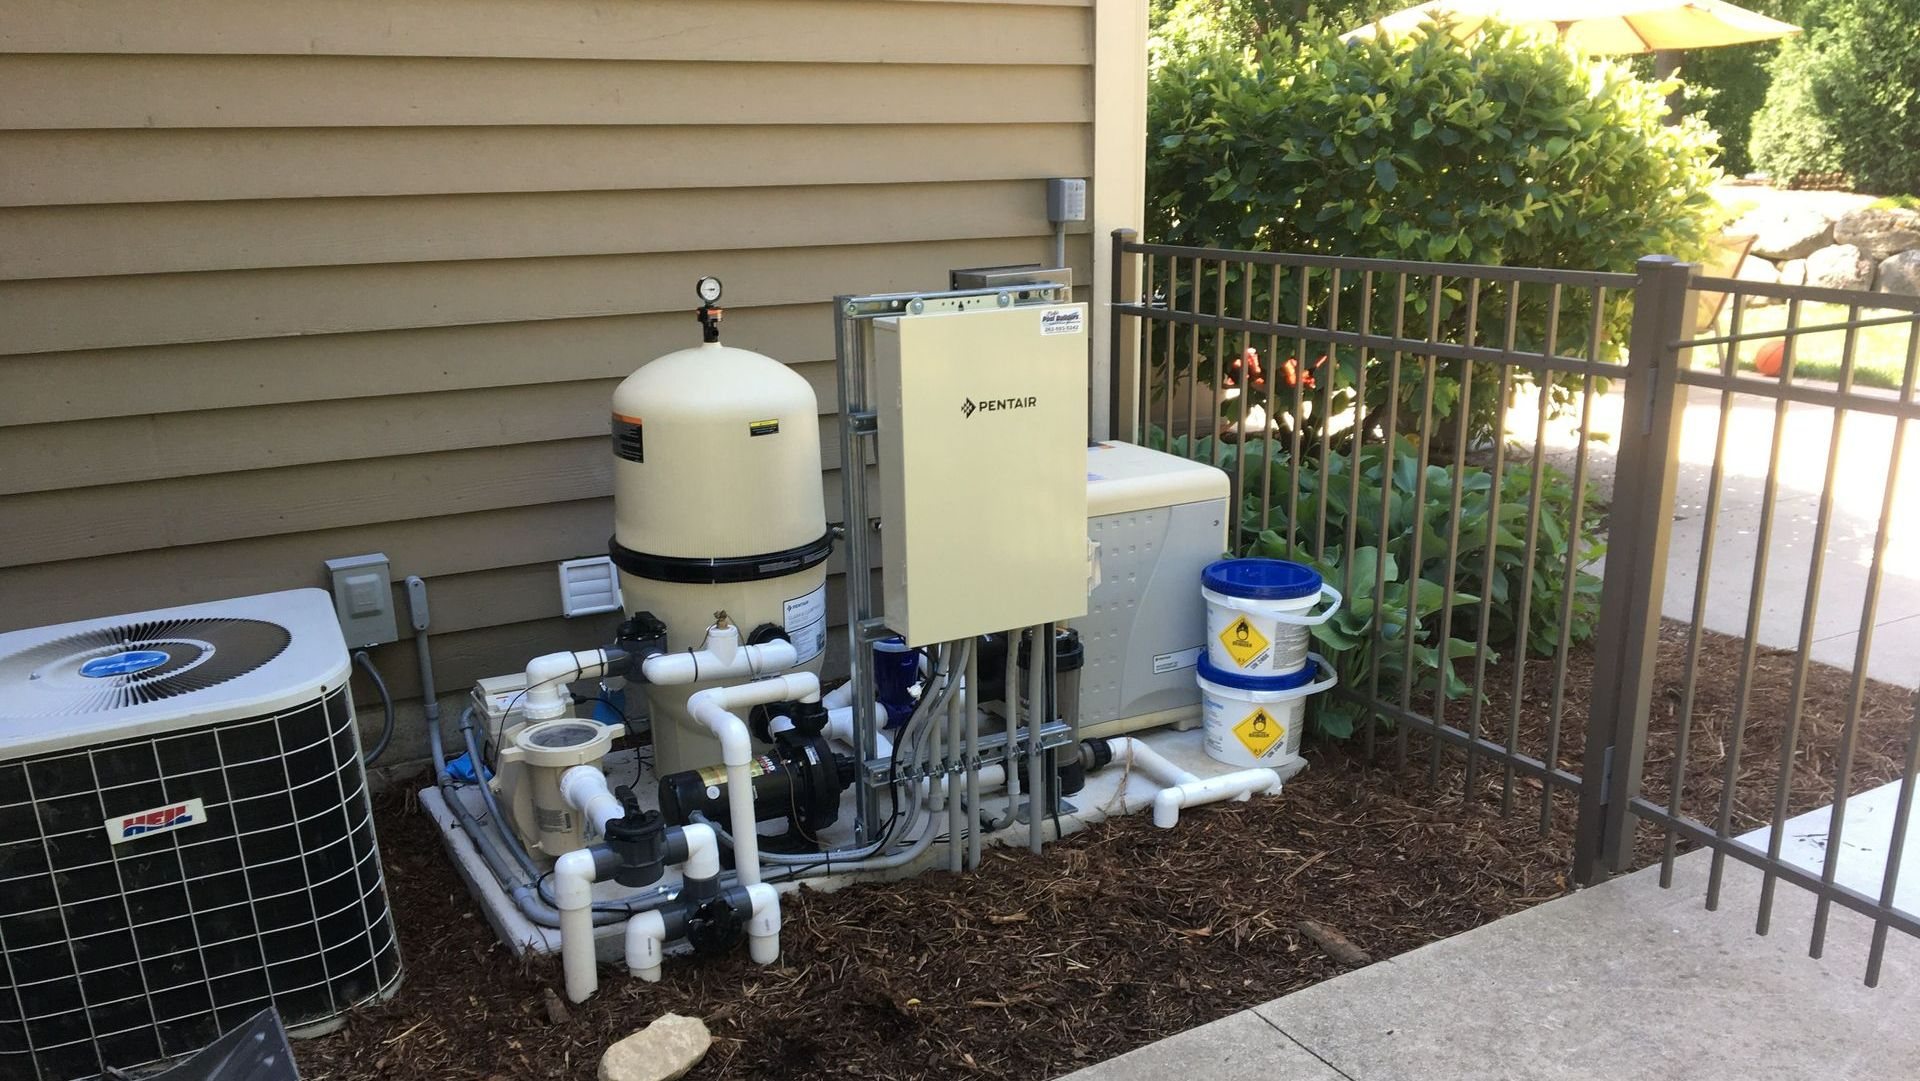 Pentair pool pump and filter. Pentair heater. Pentair pool automation IntelliCenter.